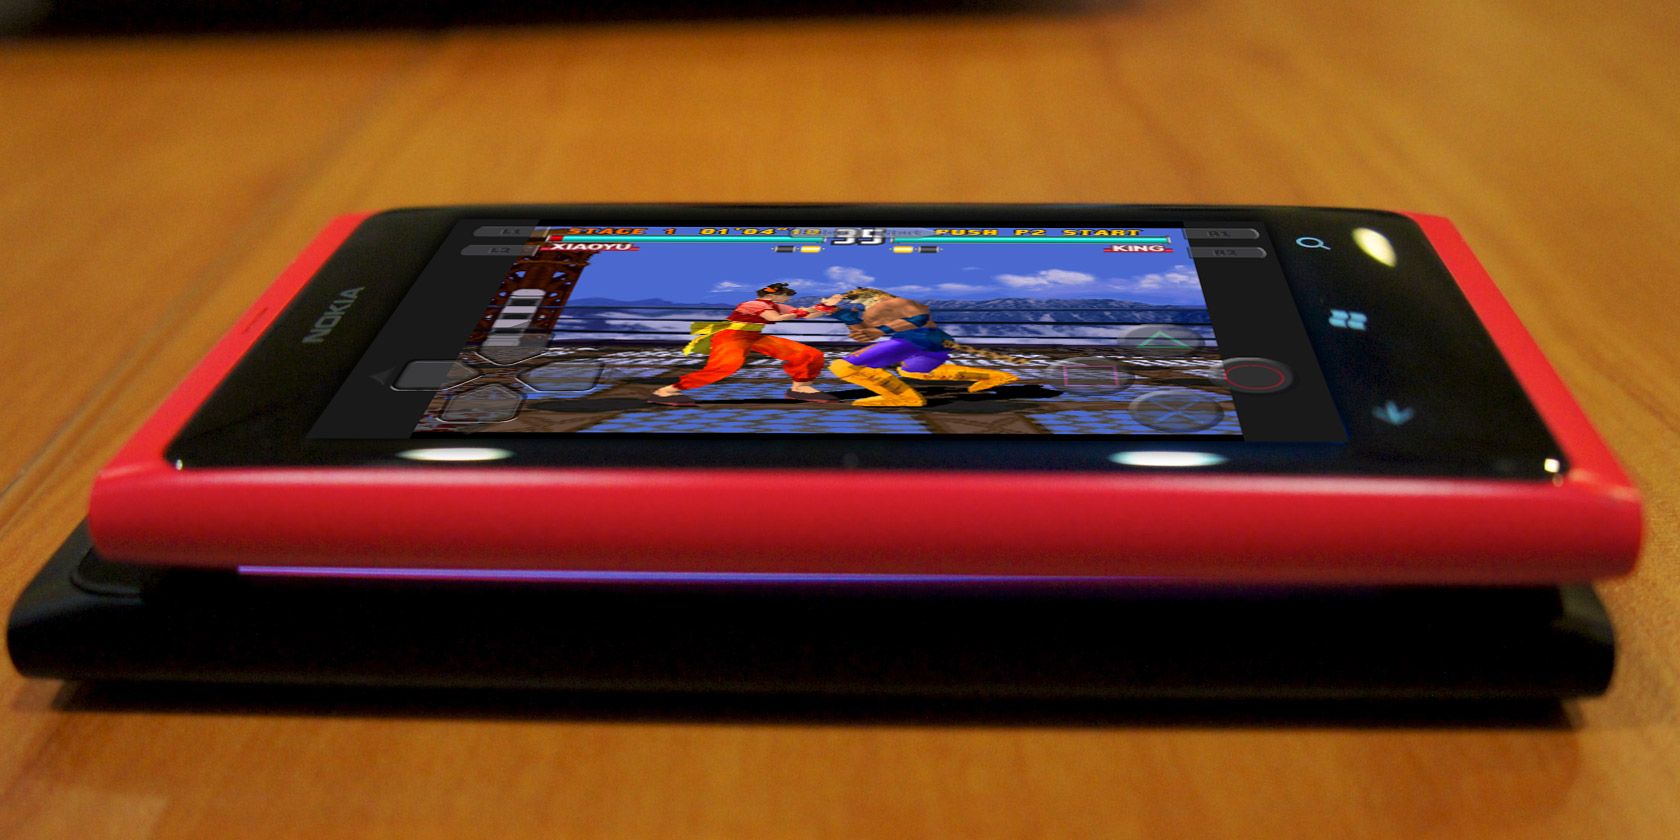 Play GameBoy Advance games on Windows Phone 8 with VBA8